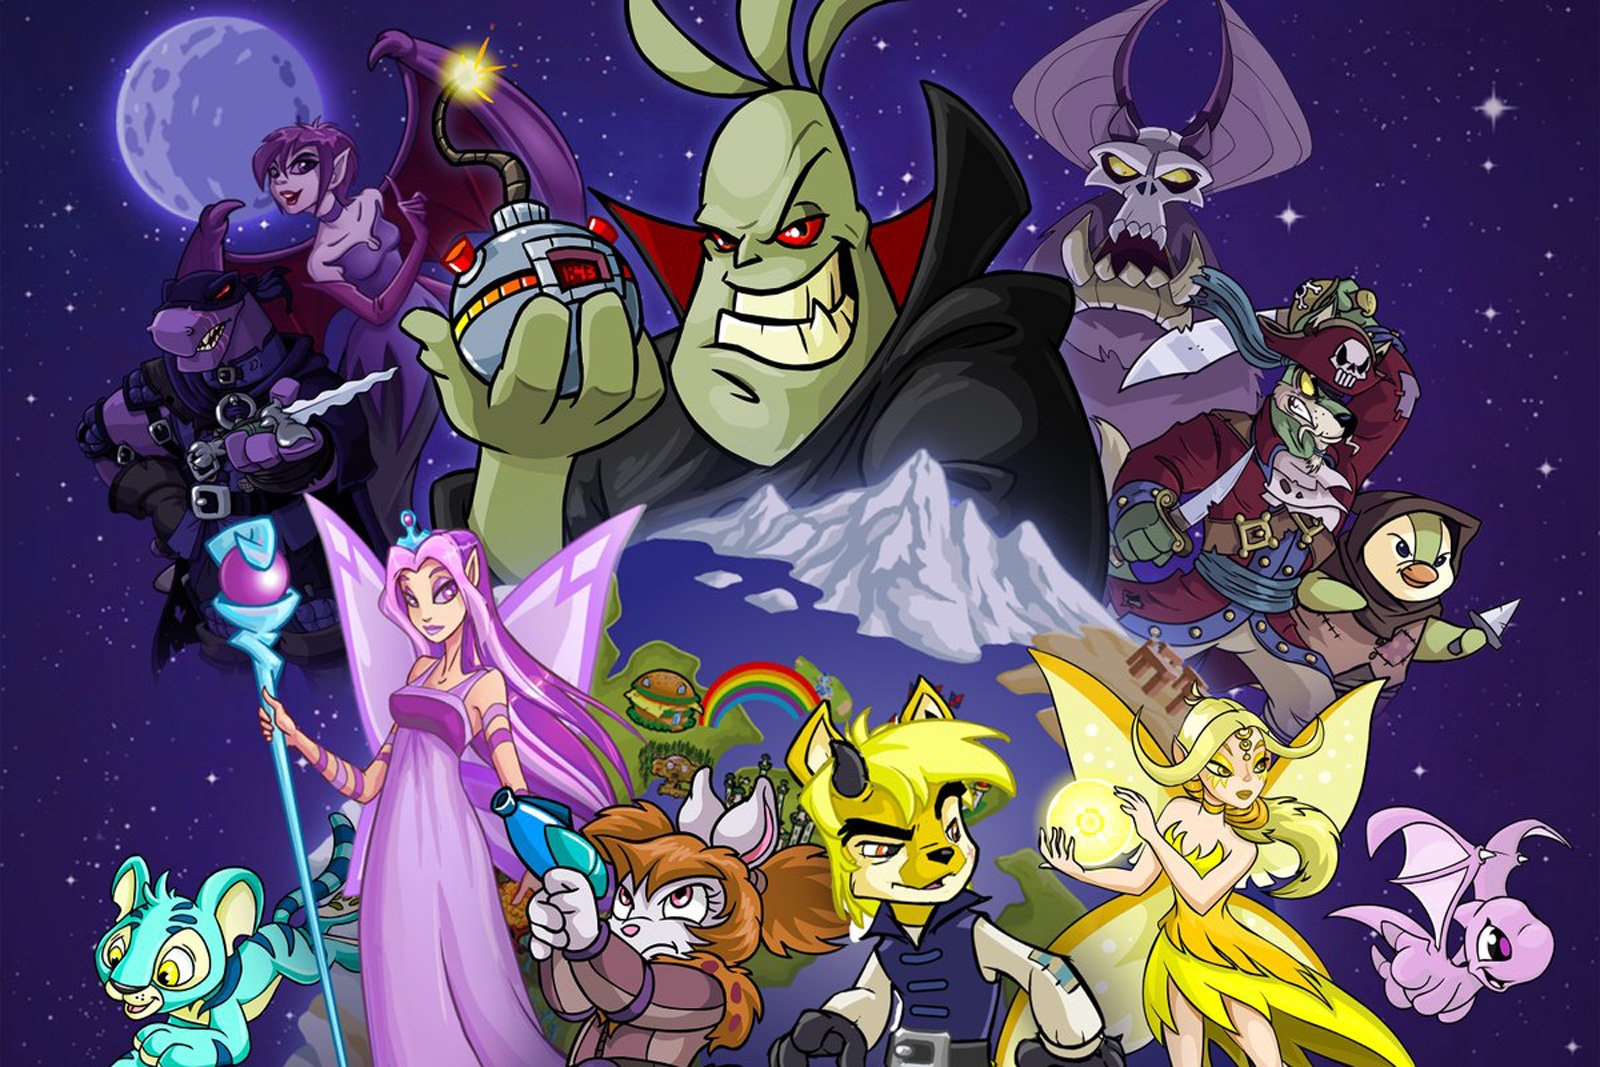 Virtual pet site Neopets is being rebooted into a TV show | DeviceDaily.com